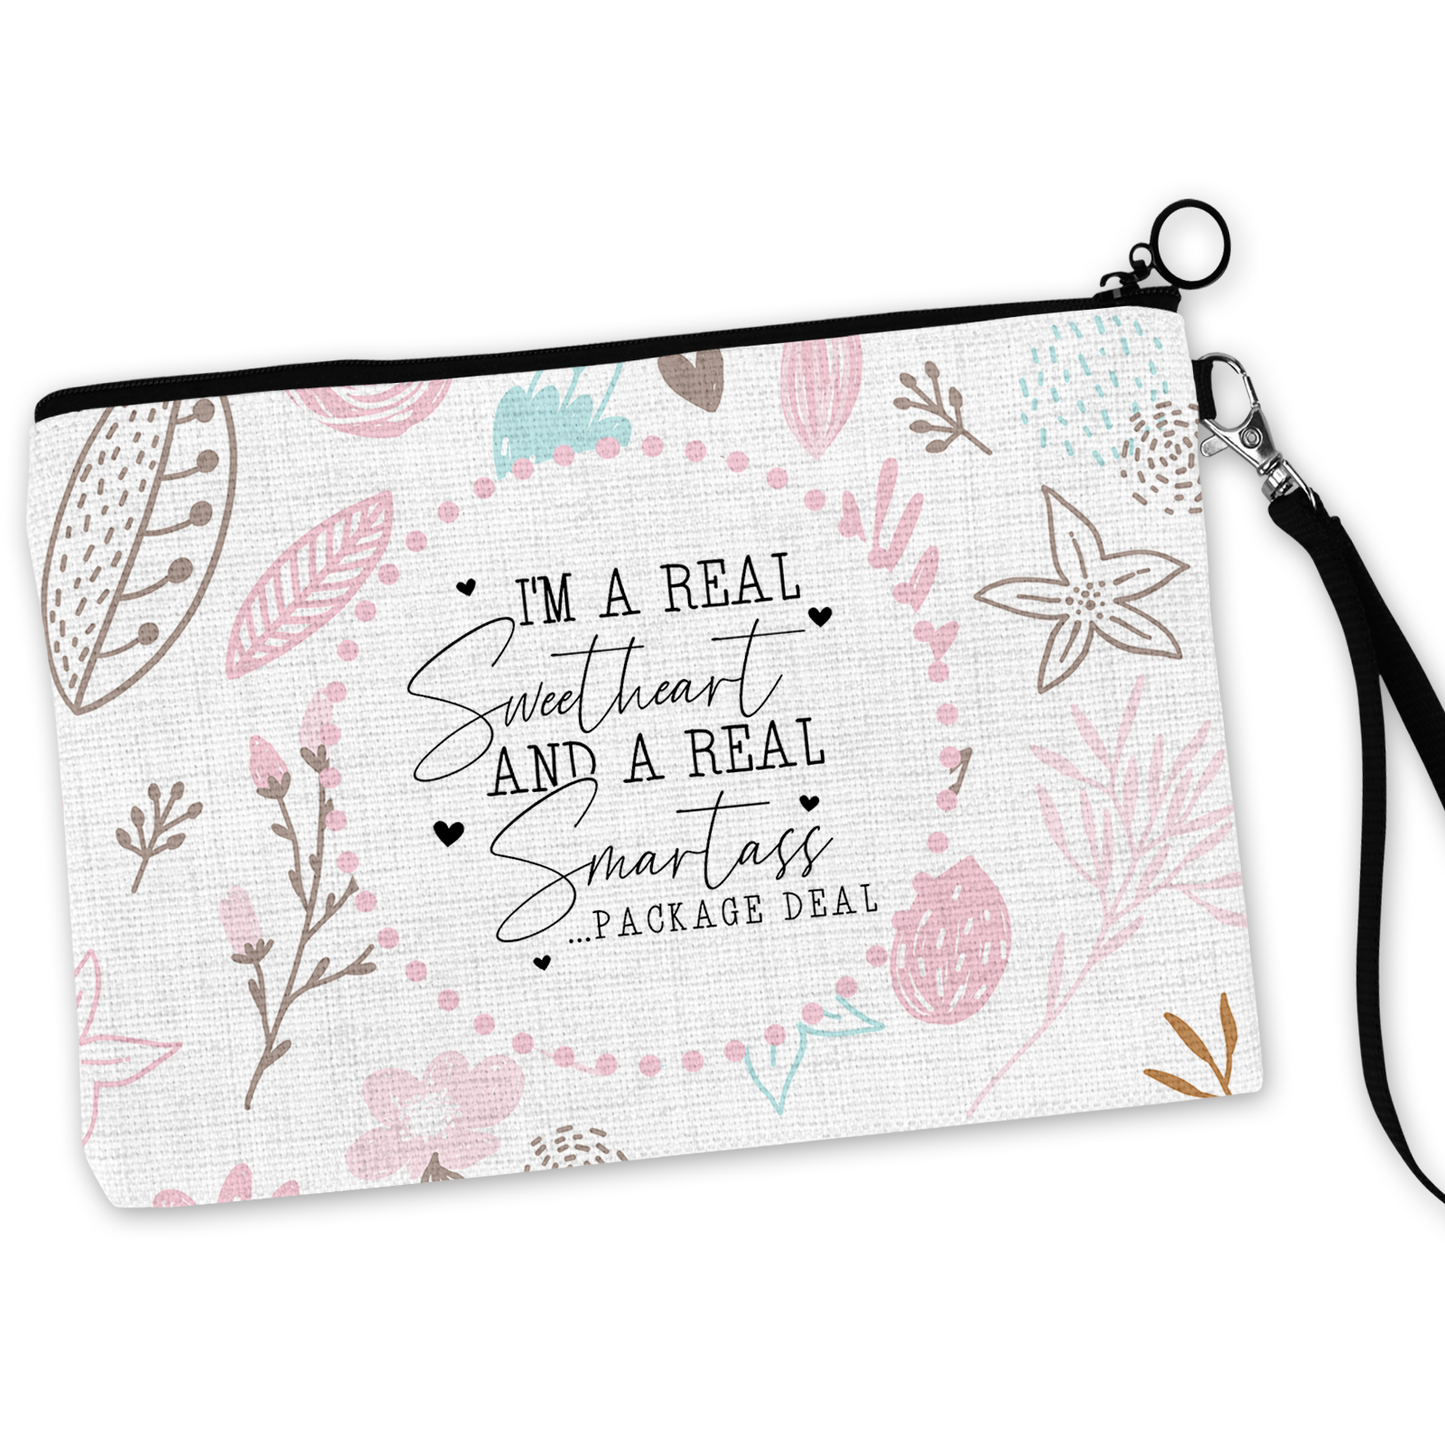 I'm A Real Sweetheart And A Real Smartass Cosmetic Bag